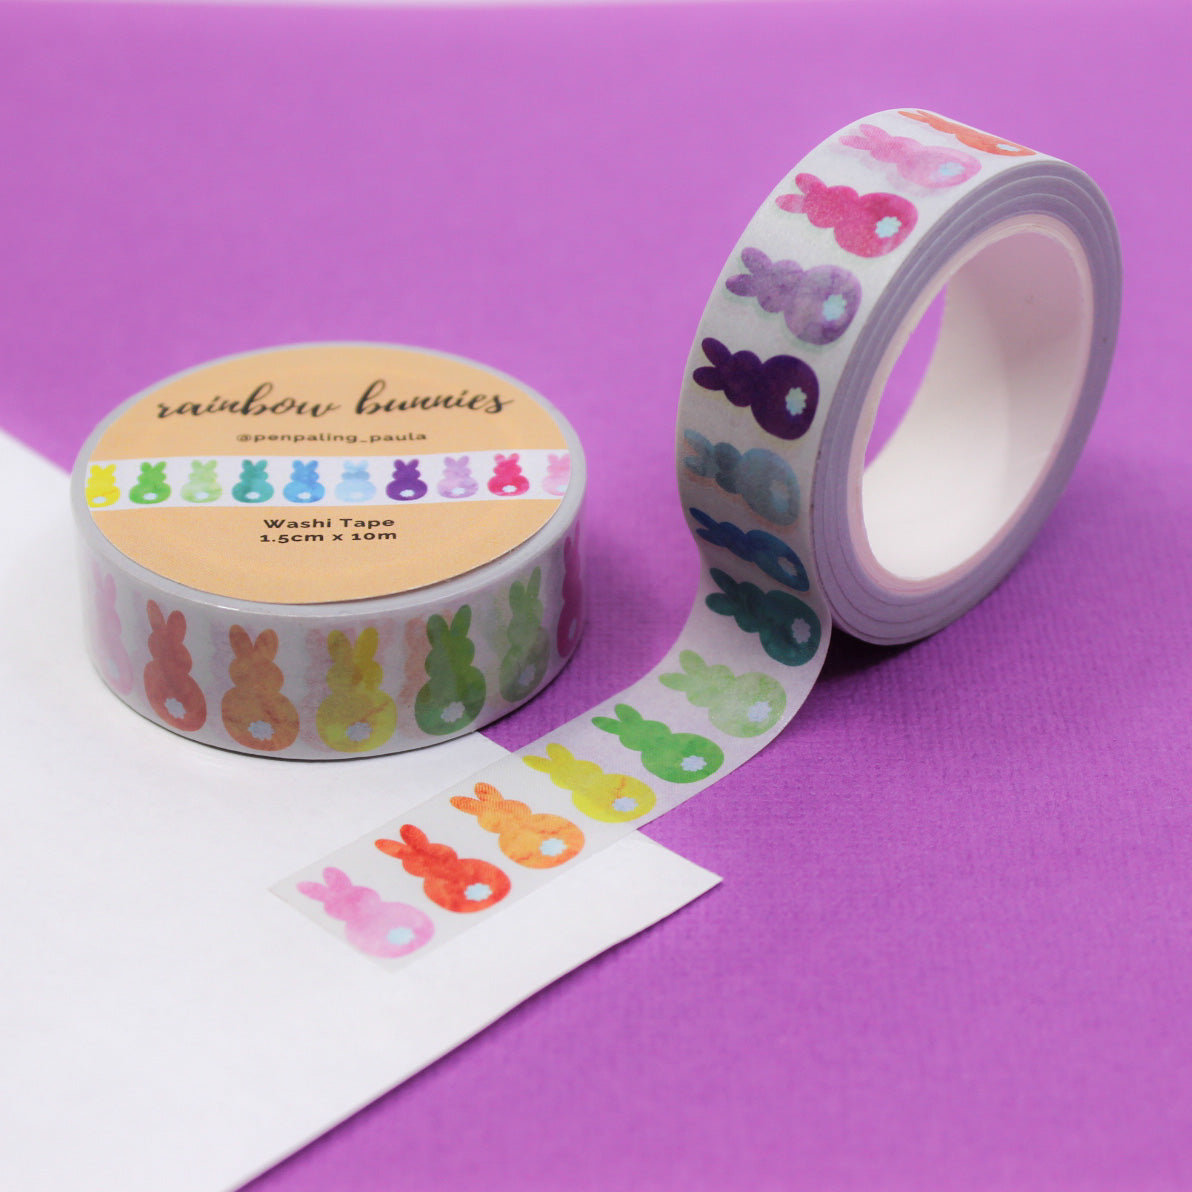 Easter Bunny Bottoms Washi Tape: Playful and charming tape featuring cute bunny bottoms, perfect for Easter crafts and decorations. This tape is designed by Penpaling paula and sold at BBB Supplies Craft Shop.